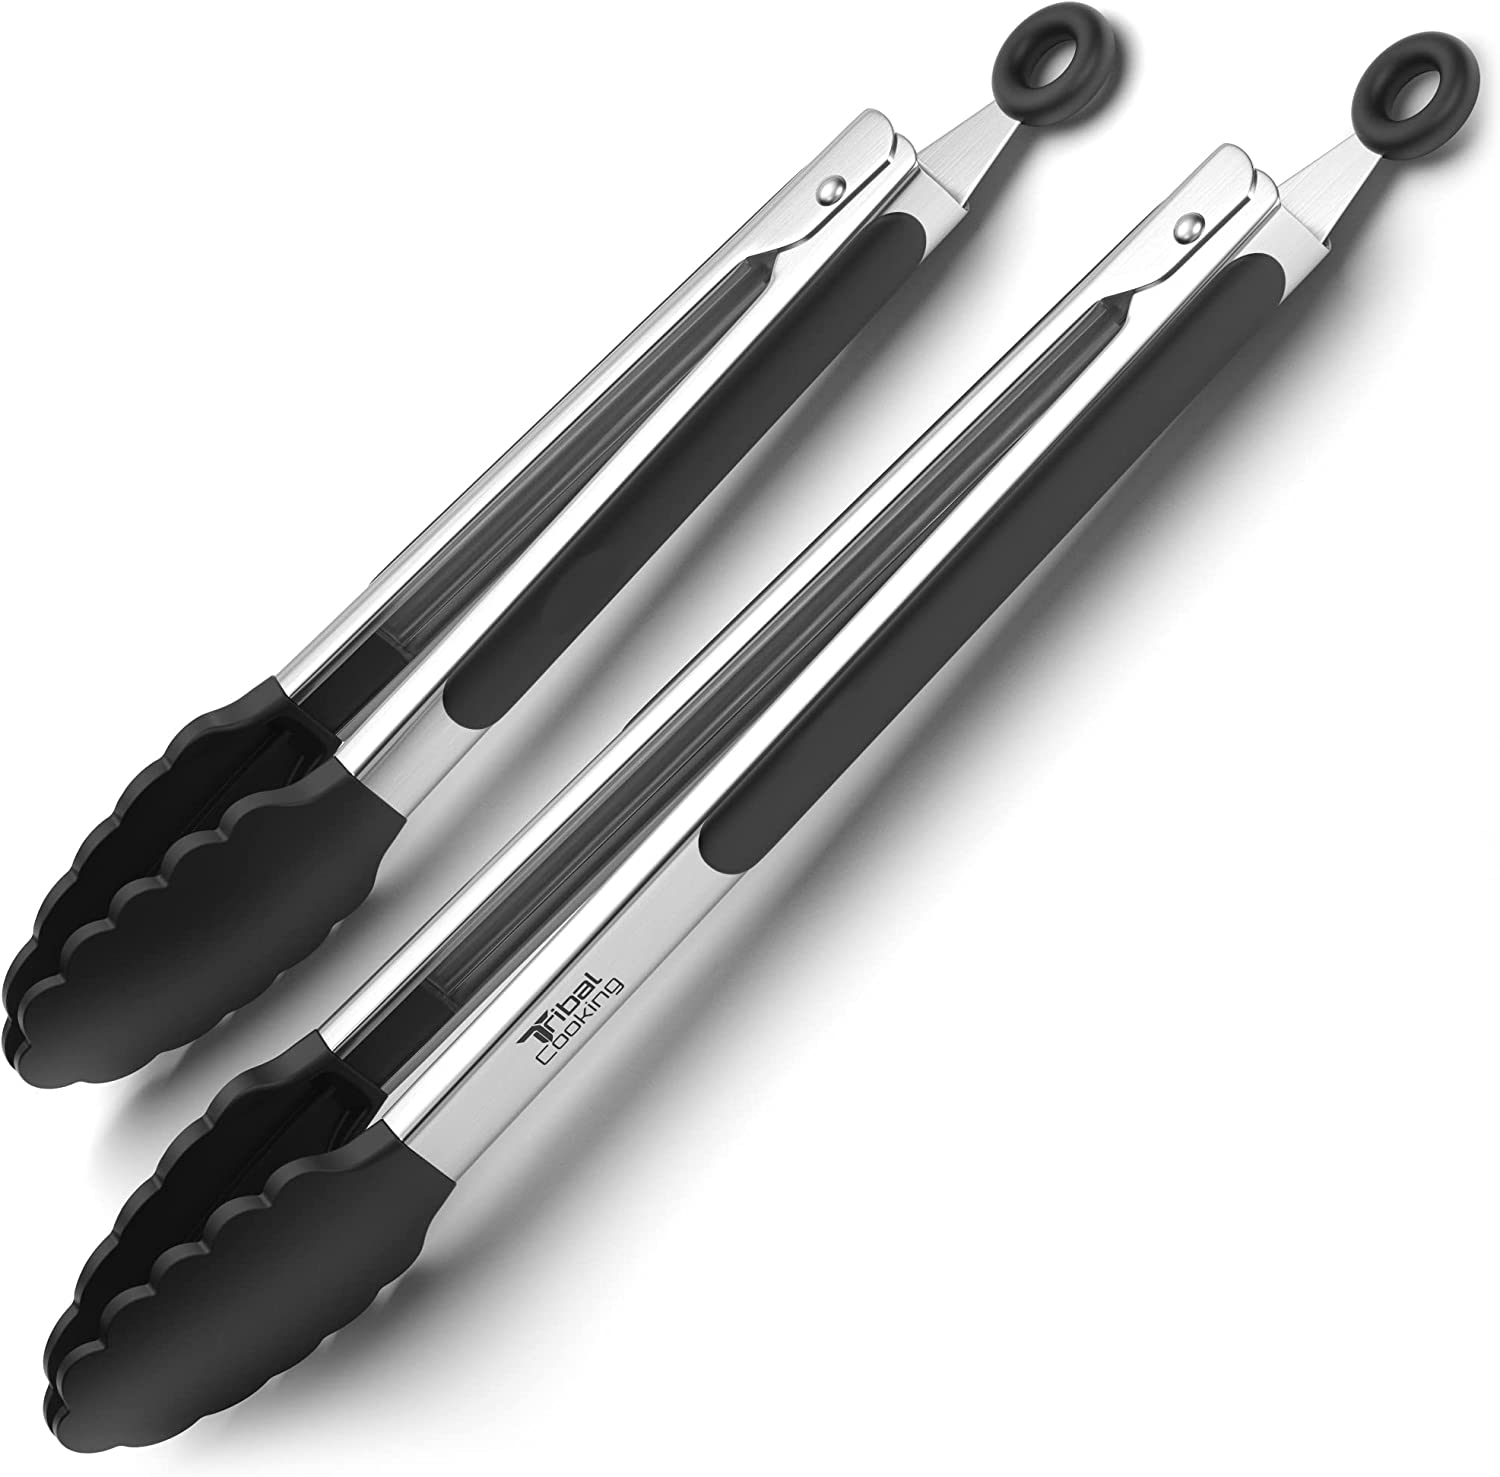 Popco The Original Food Tongs,Set of 3-7,9,12 inch,Heavy Duty, Stainless Steel Kitchen